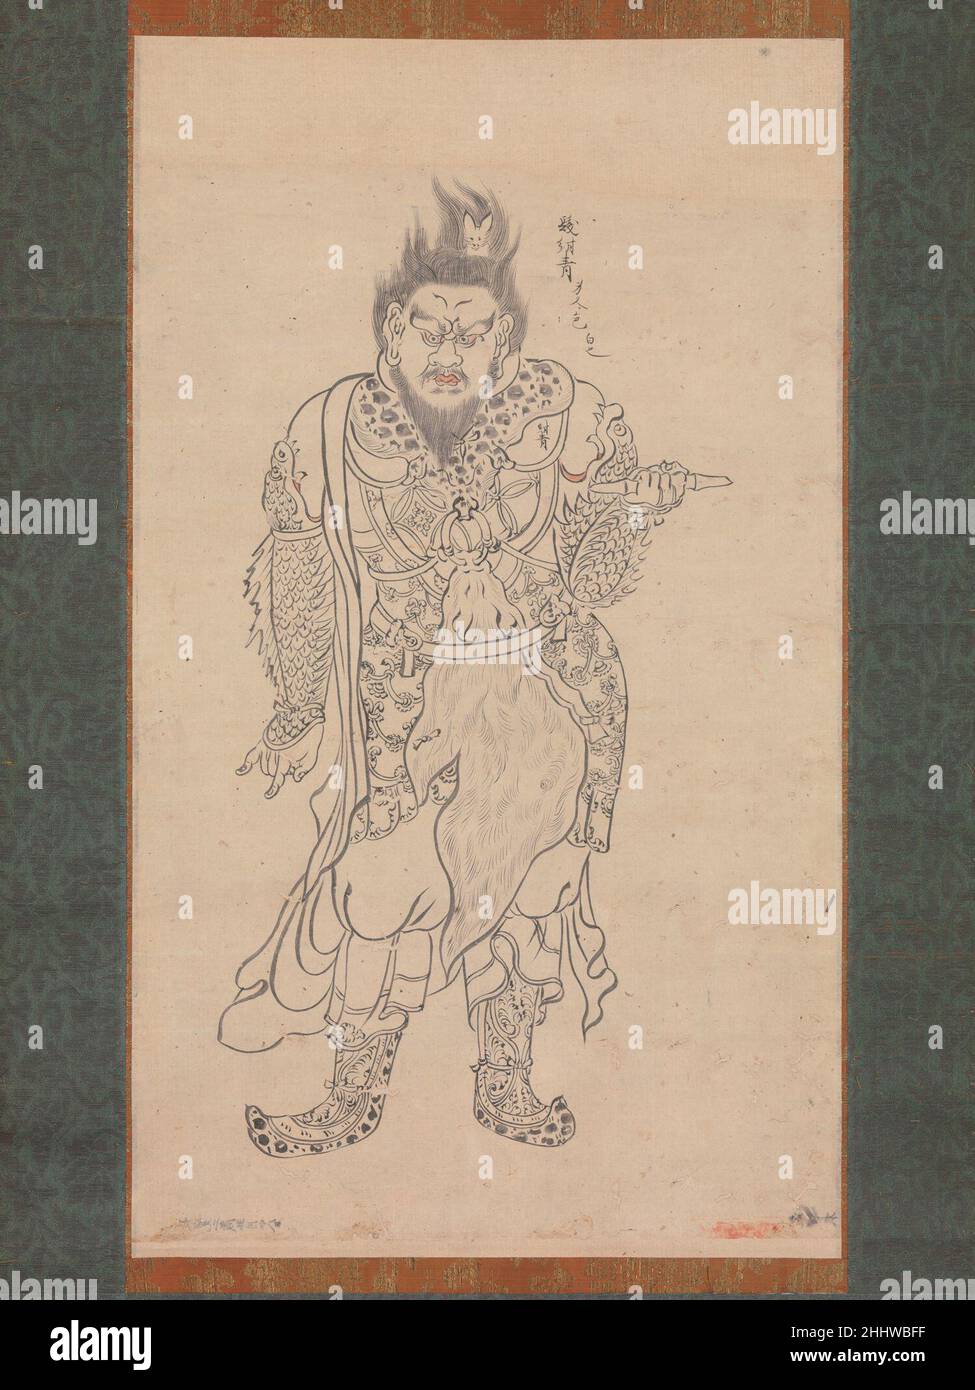 Anchira-taisho Jochi 1164 Japan The subject of this iconographic drawing, which originally belonged to Kōzanji, a temple in the mountains northwest of Kyoto, is generally identified as General Anchira (Andira in Sanskrit), one of the twelve guardian generals who dedicated themselves to the Yakushi (Bhaishajyaguru) Buddha. The twelve generals are usually crowned with the twelve animals of the zodiac; here, Anchira has a rabbit on his head.The drawing was executed with exceptional care. According to a document accompanying the scroll, it was copied by Jōchi from a Chinese model in 1164. Inscript Stock Photo